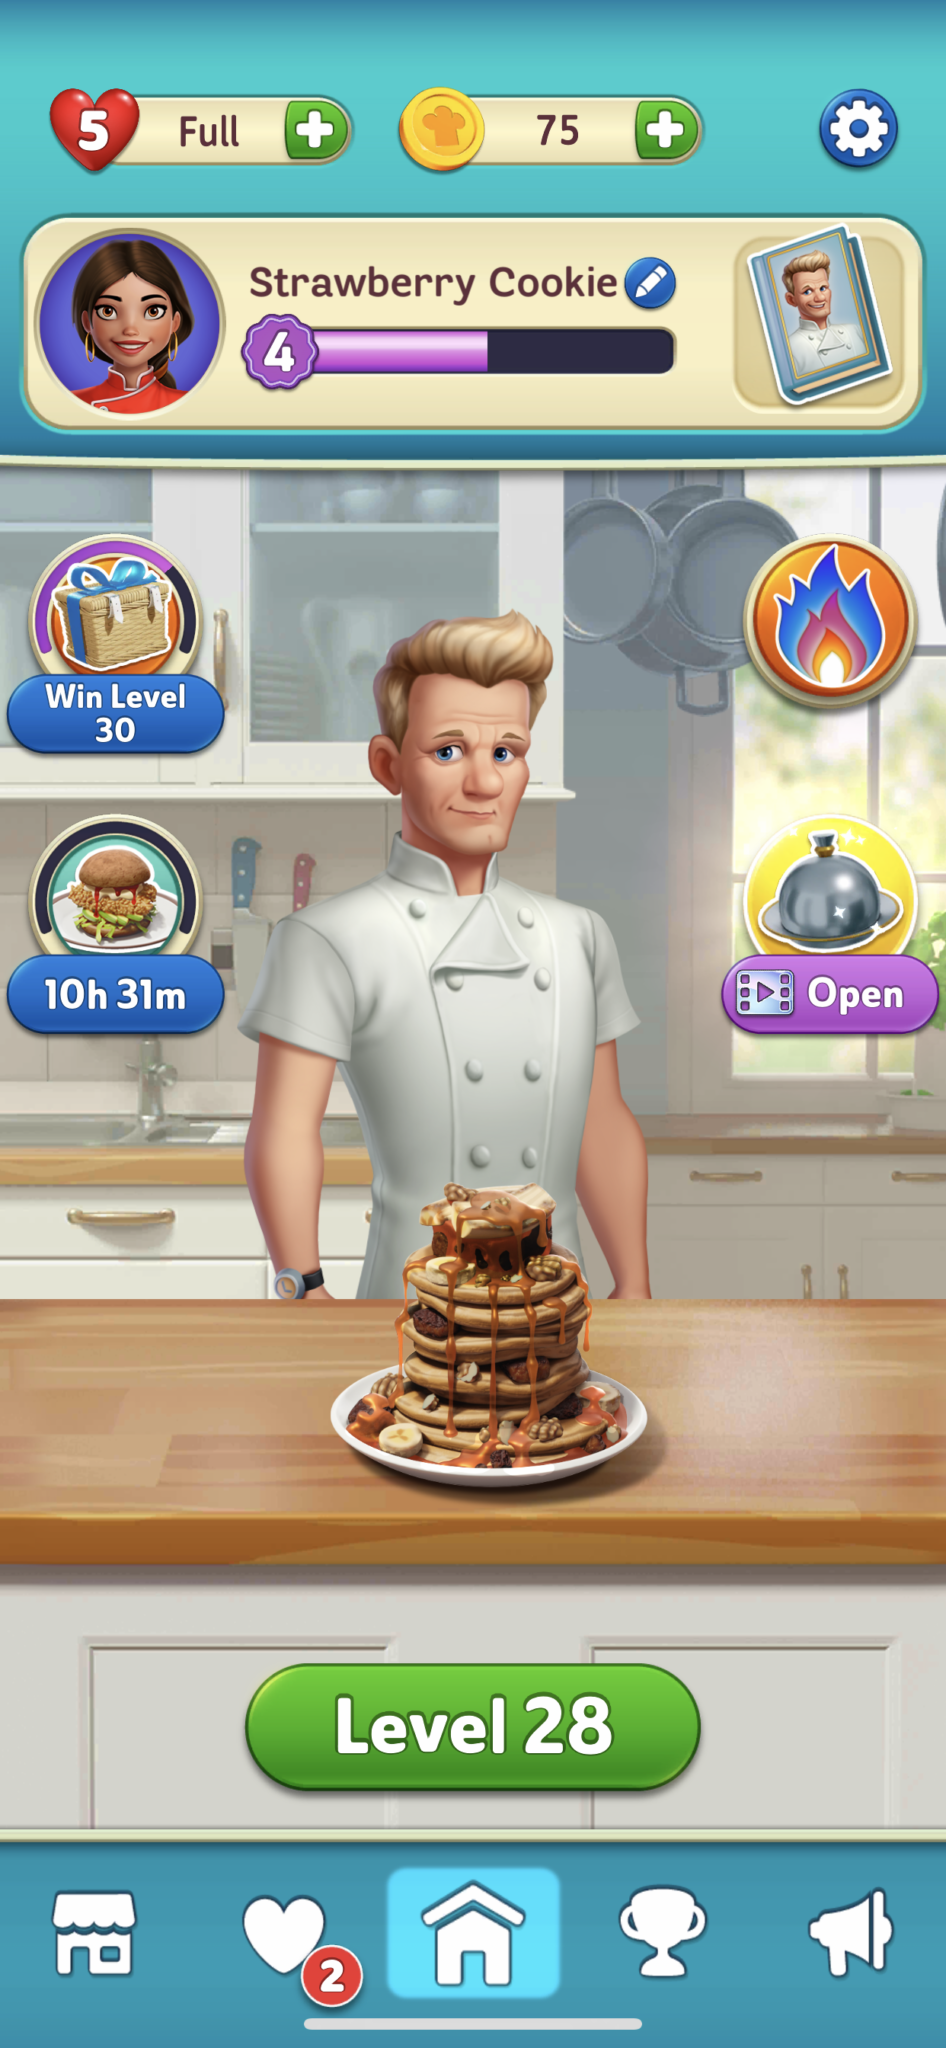 Play Gordon Ramsay's Chef Blast Mobile Game- Inspired by Culinary Genius!